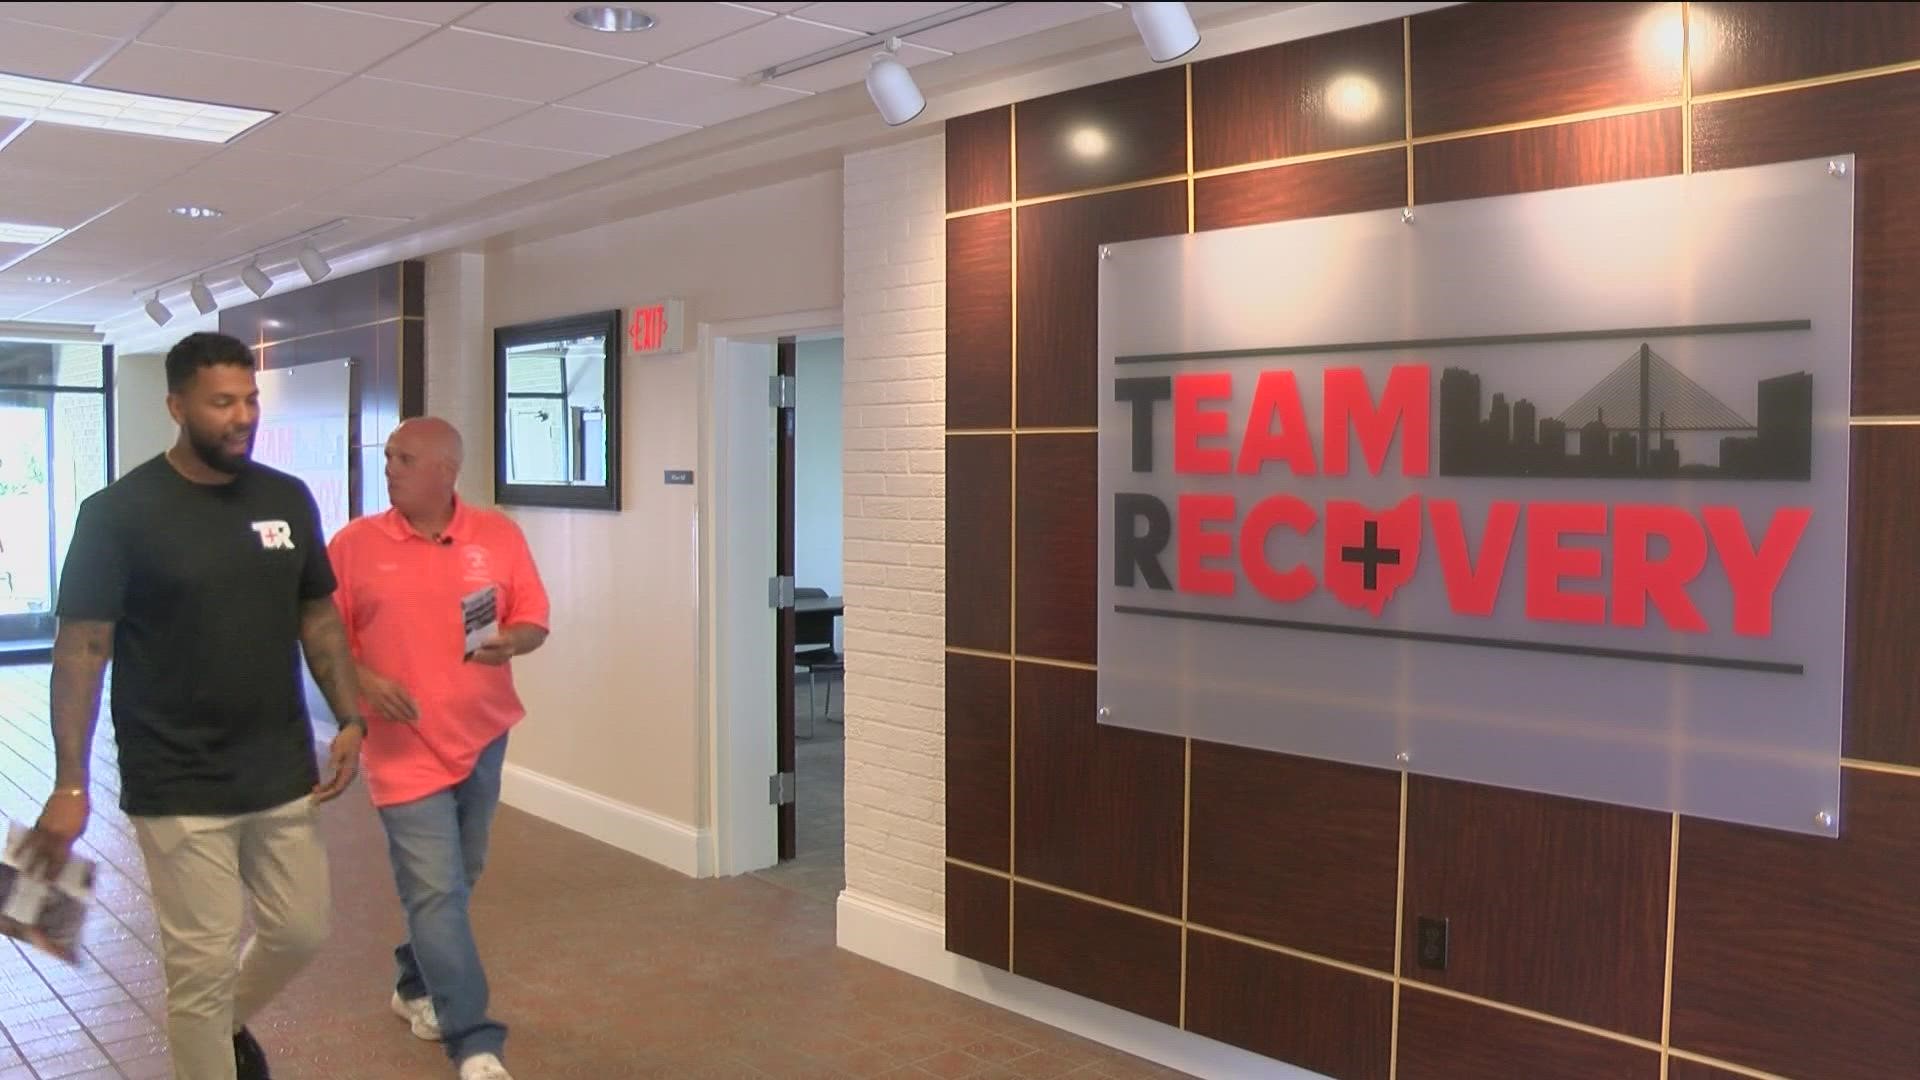 Team Recovery partners with the former Heavenly Cut lawn-care business to help clients get back on their feet with jobs, counseling.